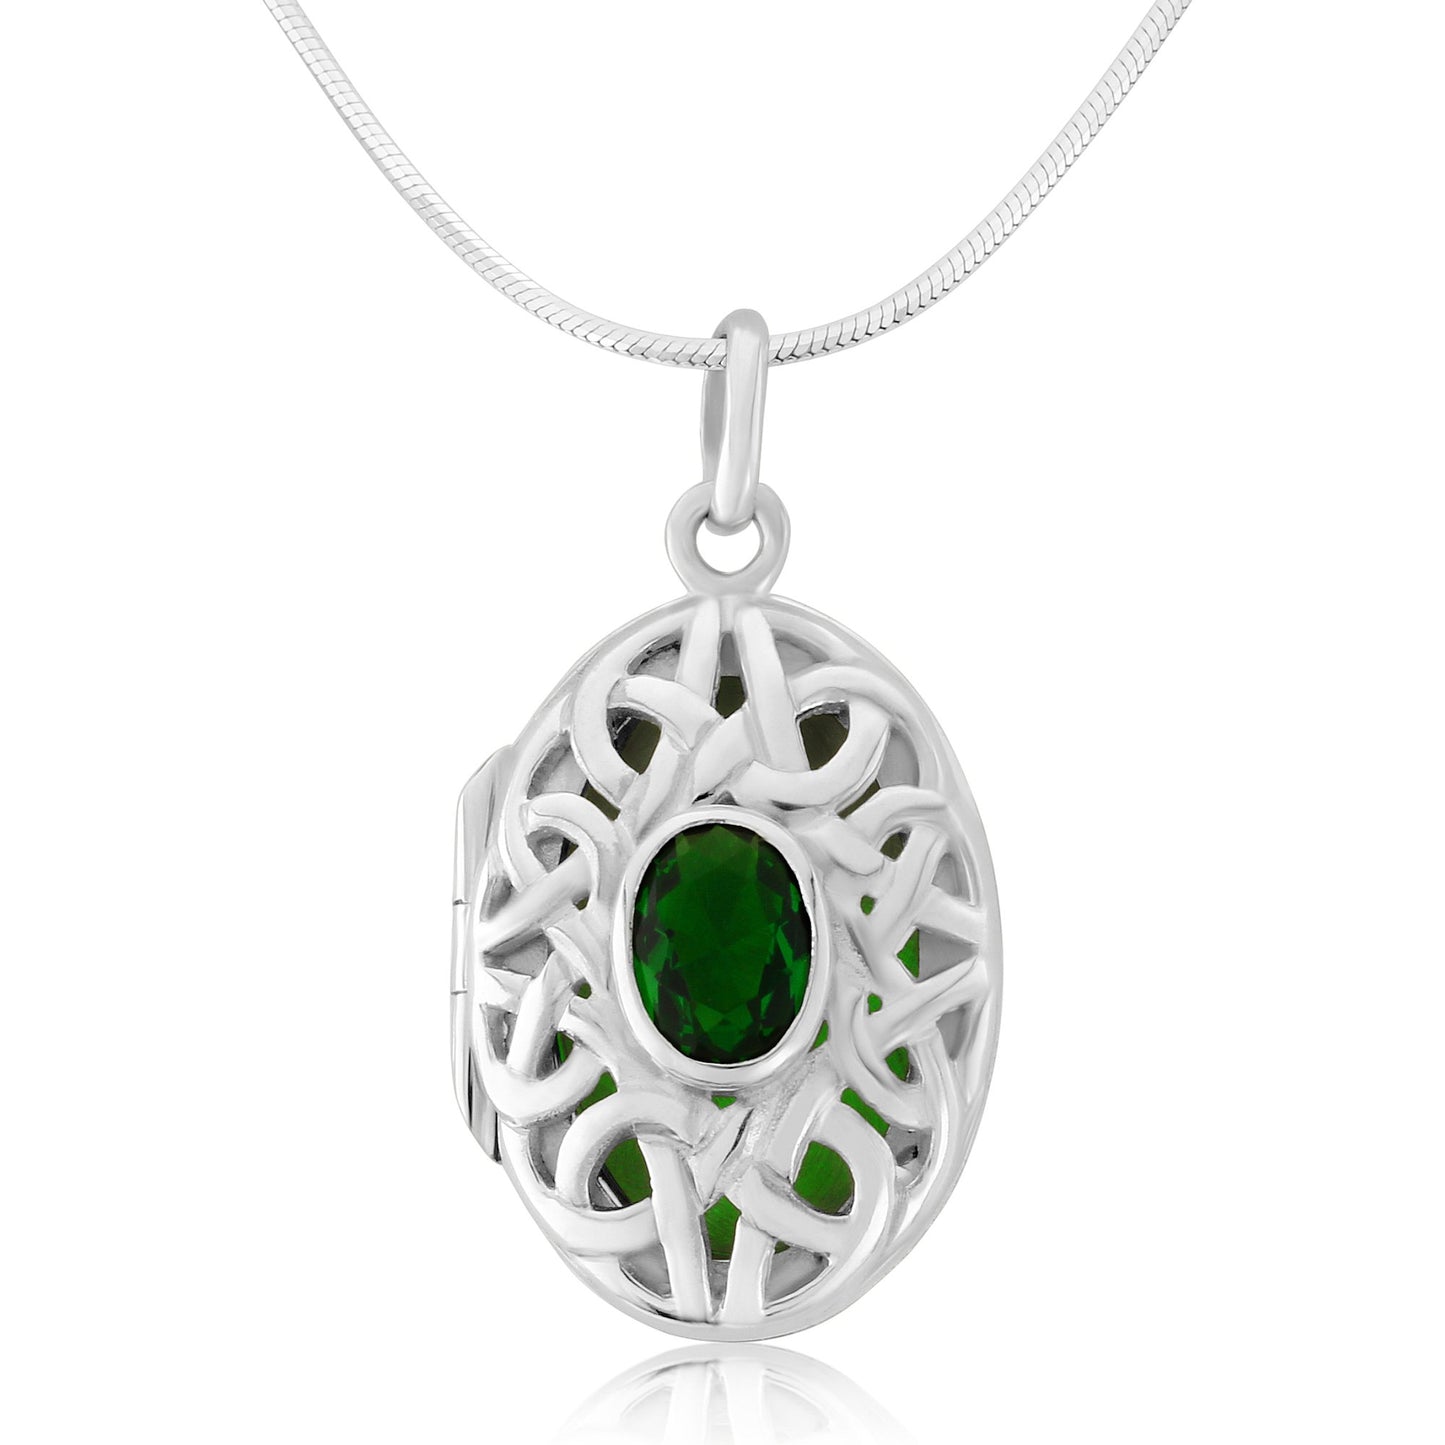 Celtic Knot Sterling Silver Locket with Green CZ and Chain